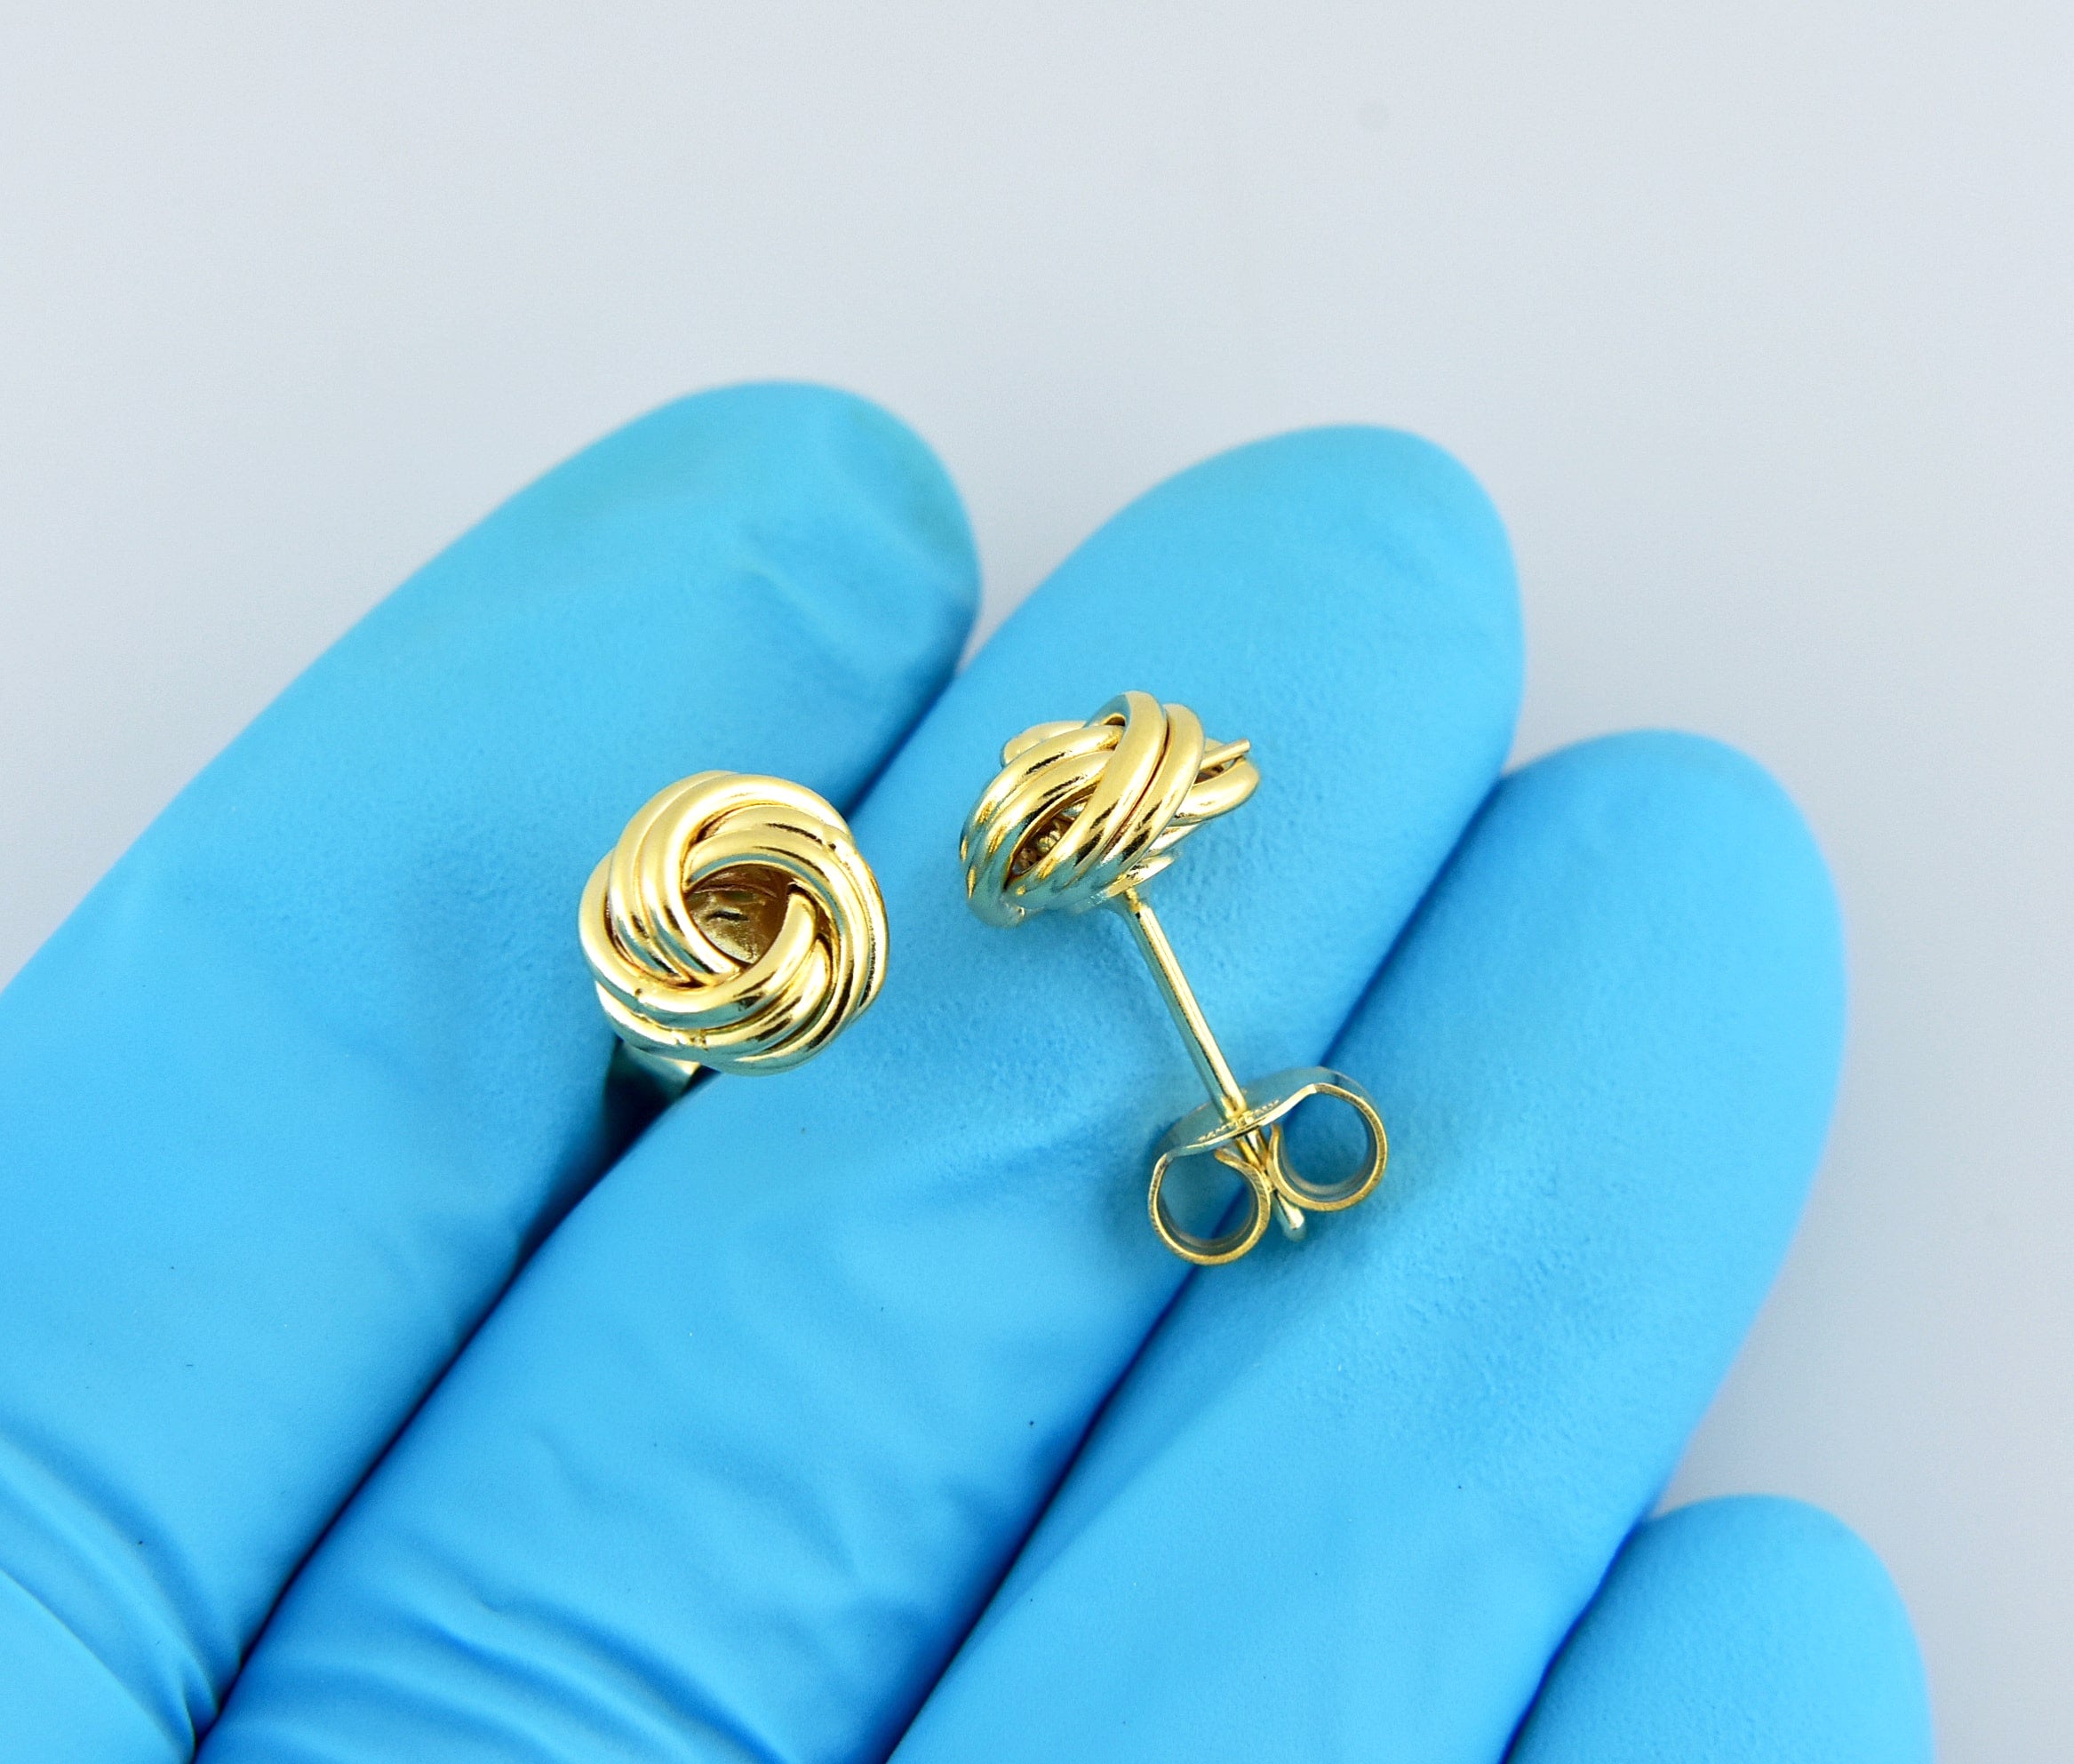 14k Yellow Gold 9mm Classic Love Knot Stud Post Earrings